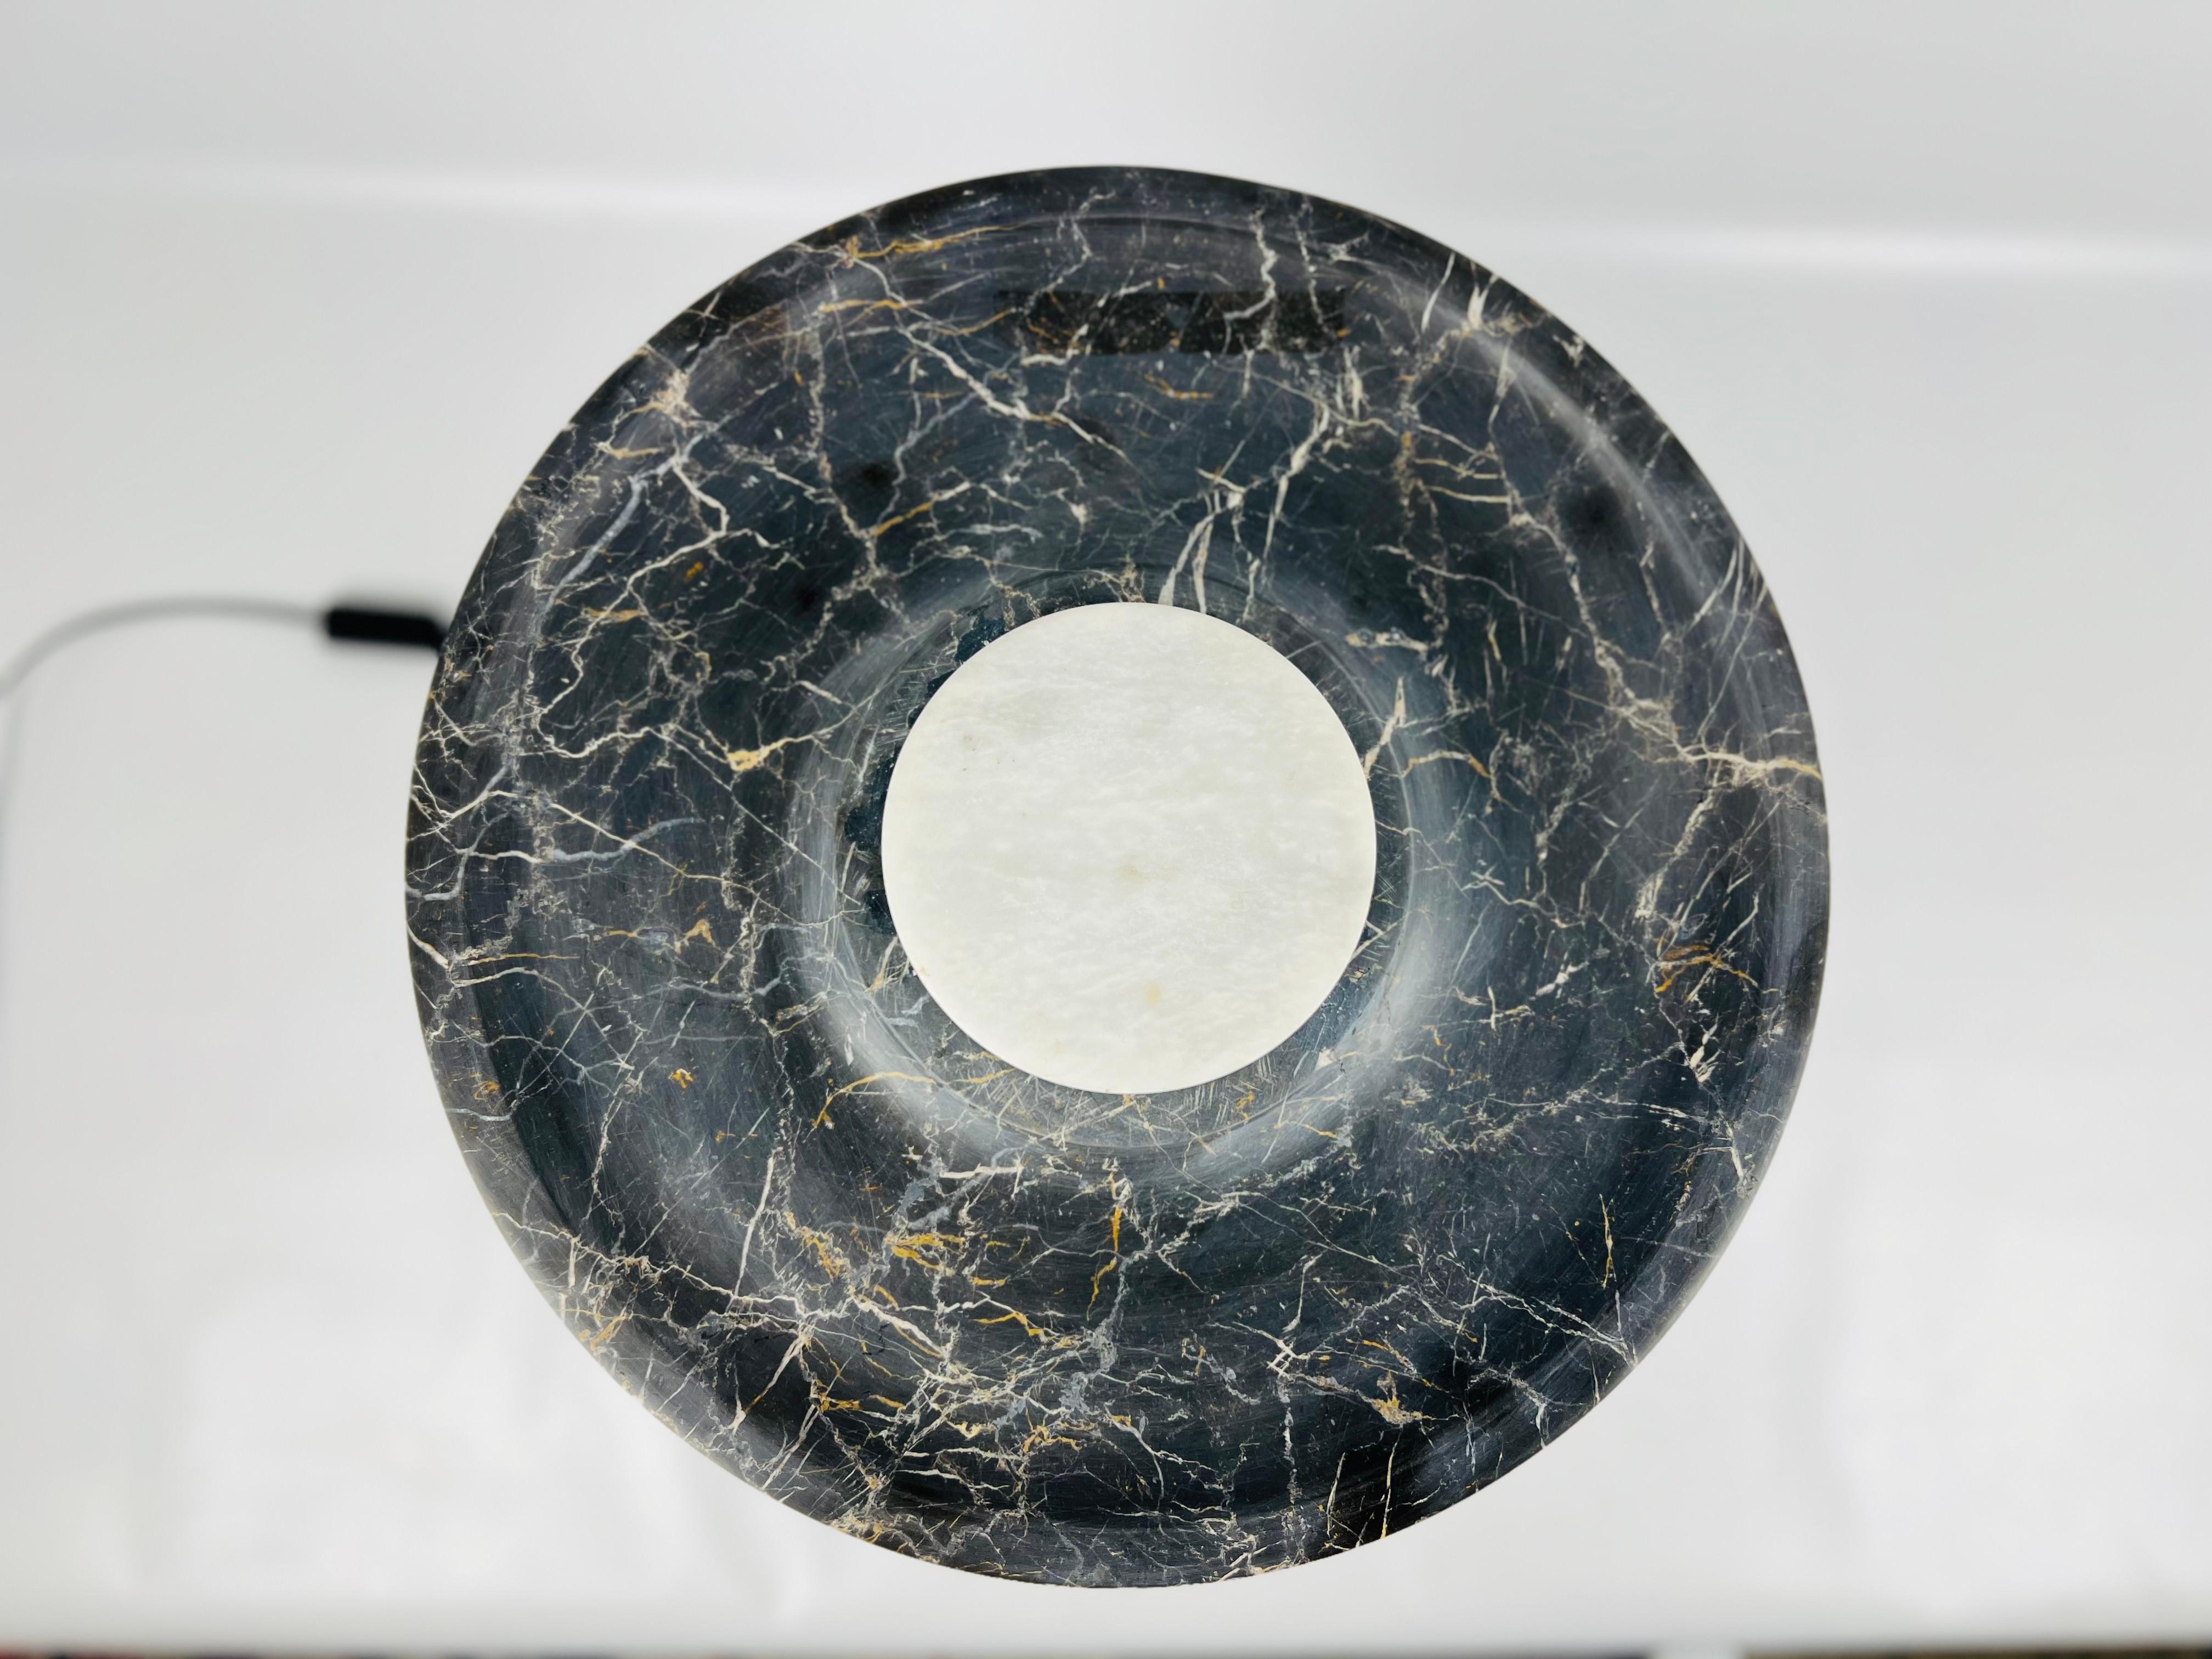 Our black and white marble halo table lamp is a stylish lighting fixture that is perfect for adding a touch of sophistication to any room in your home. The lamp features a cylindrical stem base made from high-quality marble stone, which provides a